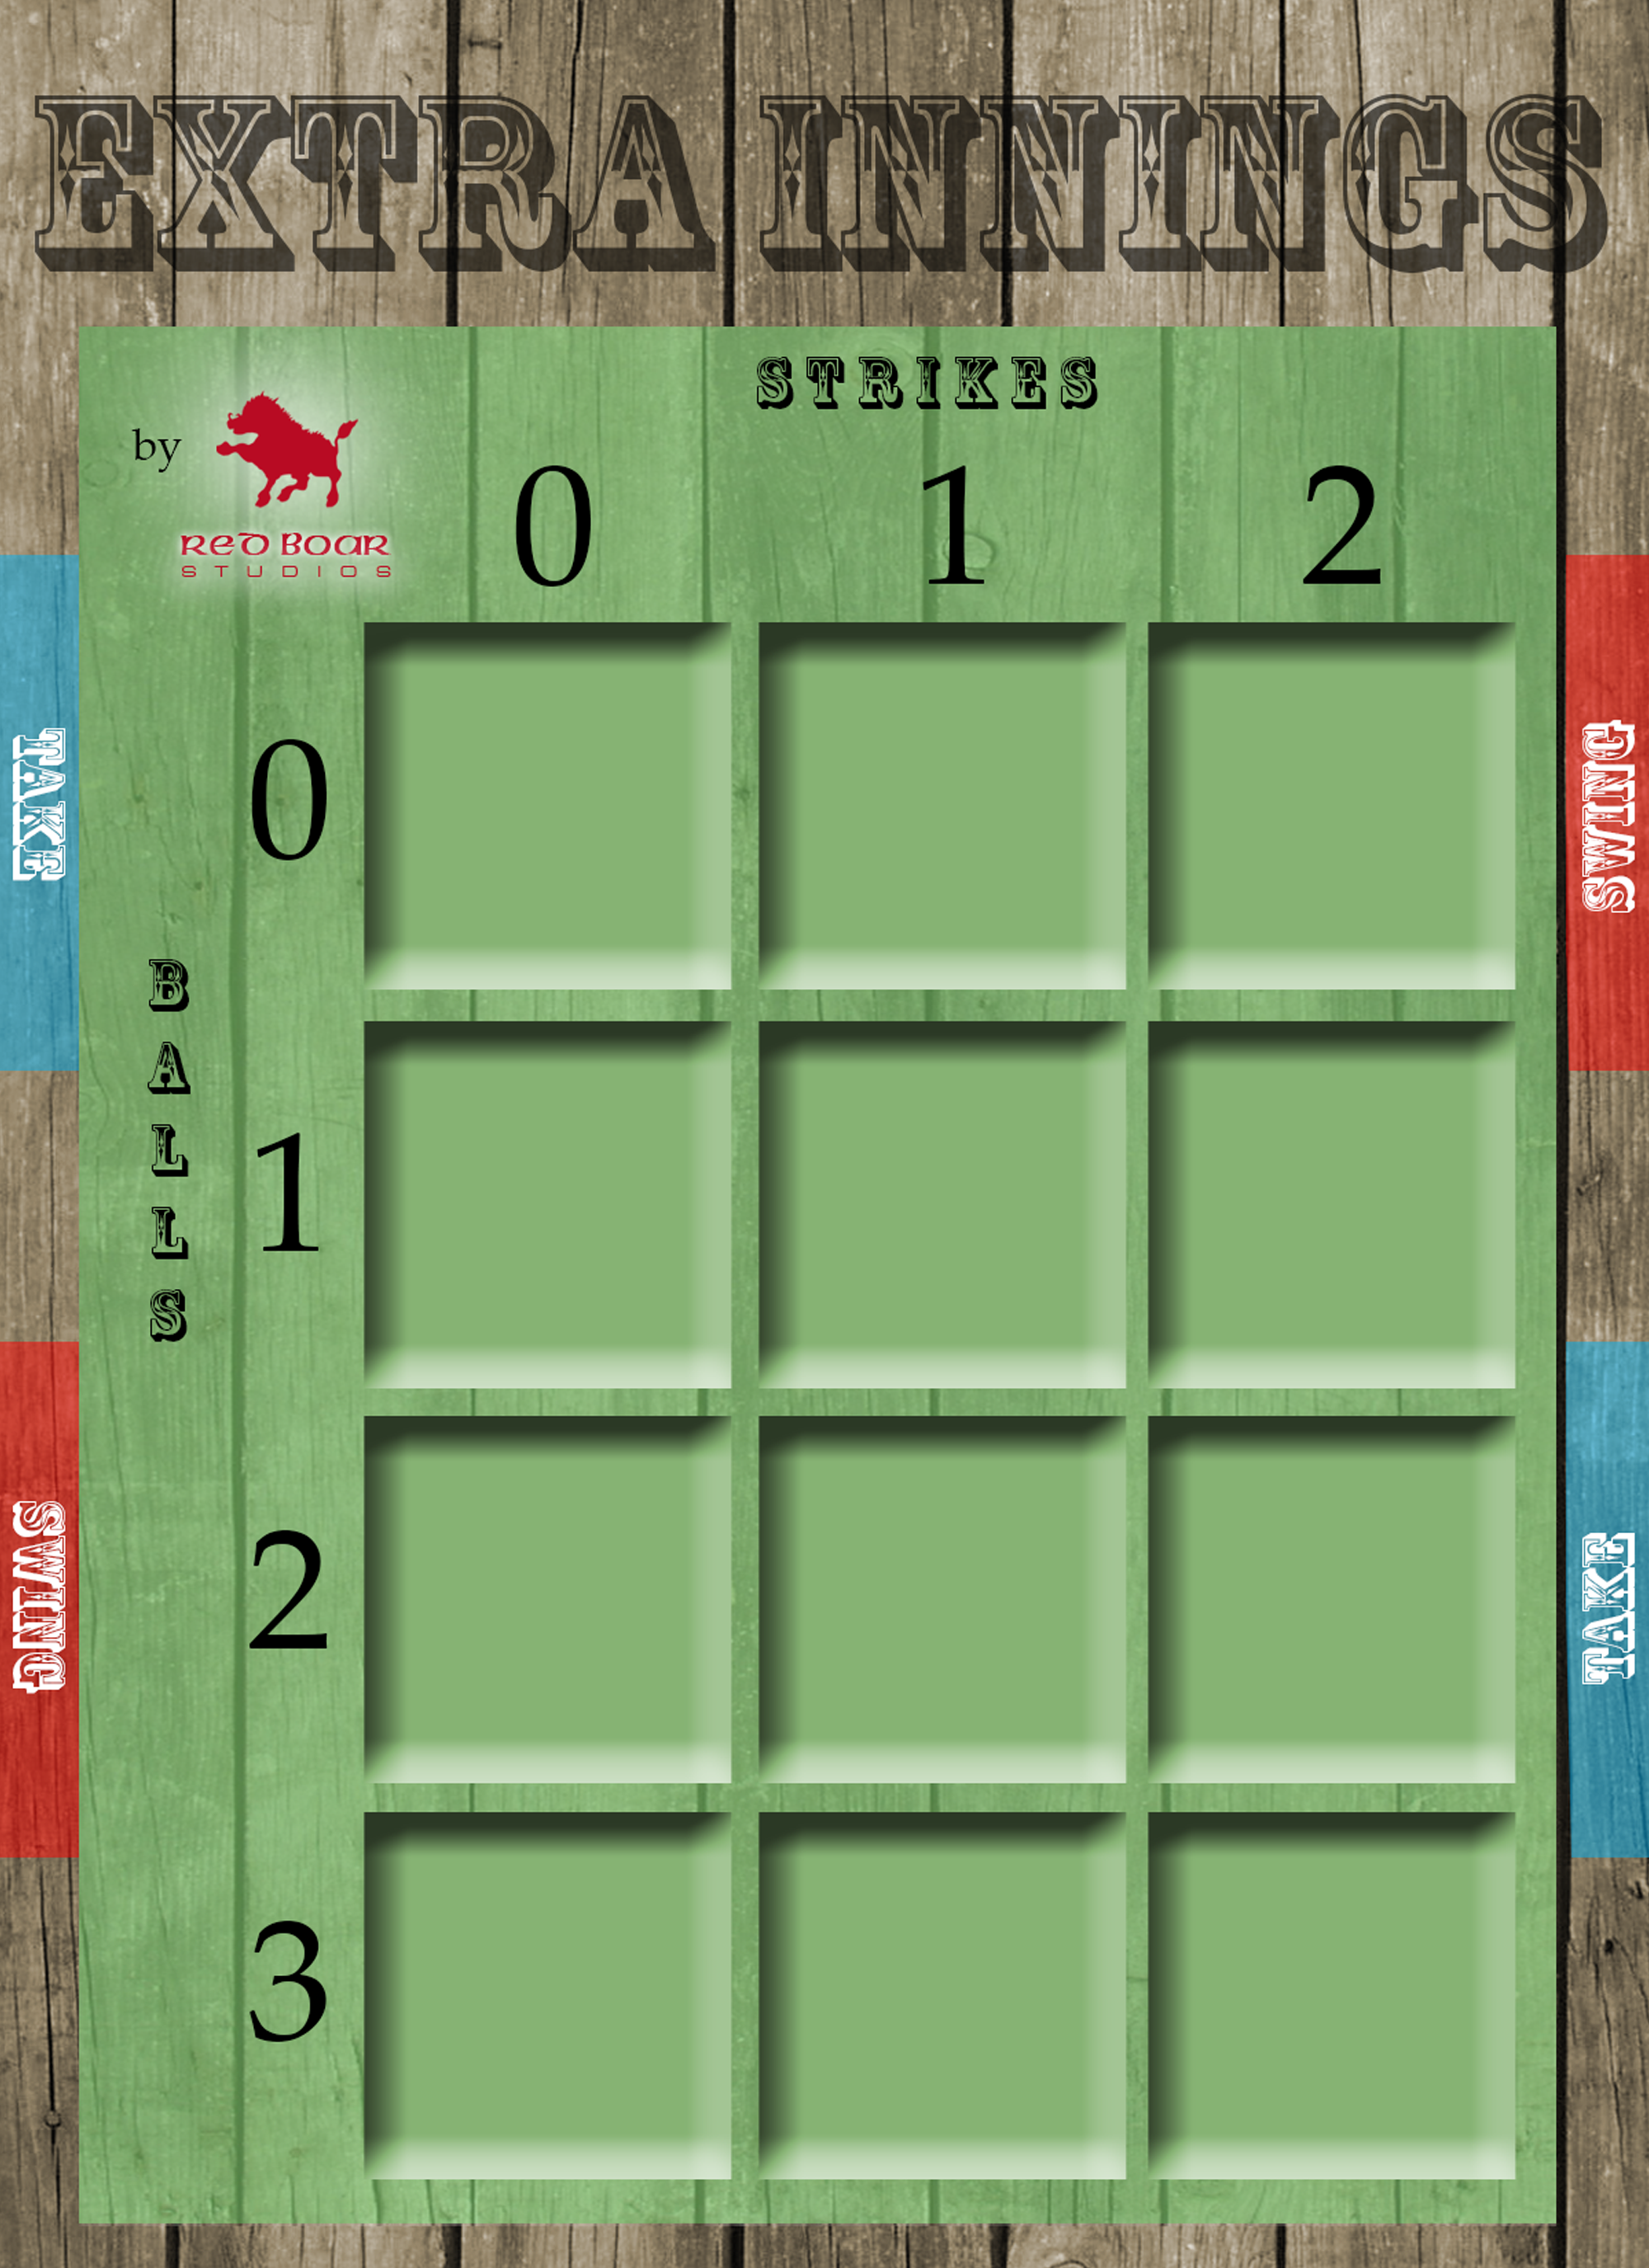 The expansion board for Extra Innings comes with - yes, baseball cards! - to select pitches for the fielding team and swing choices for the batting team. Keep track of balls and strikes for each at bat.